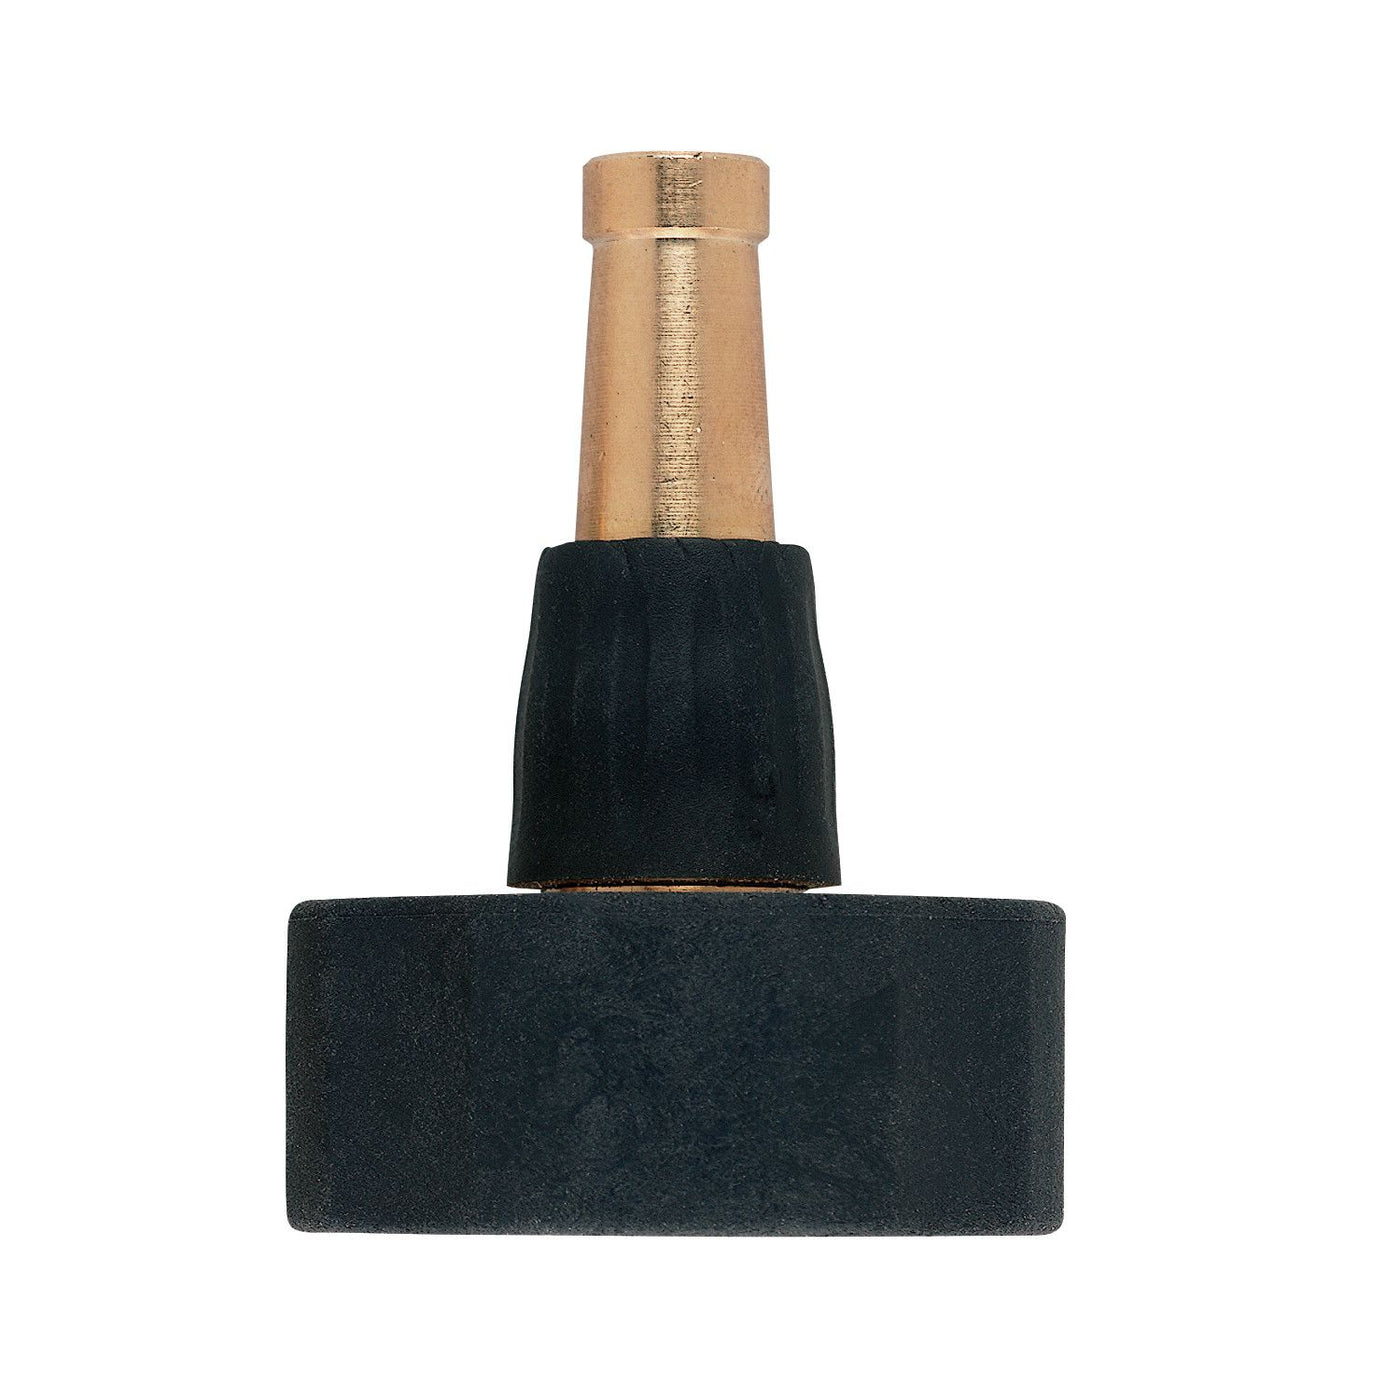 Pro Series 5-in. Adjustable and Sweeper Brass Nozzle Dual Pack